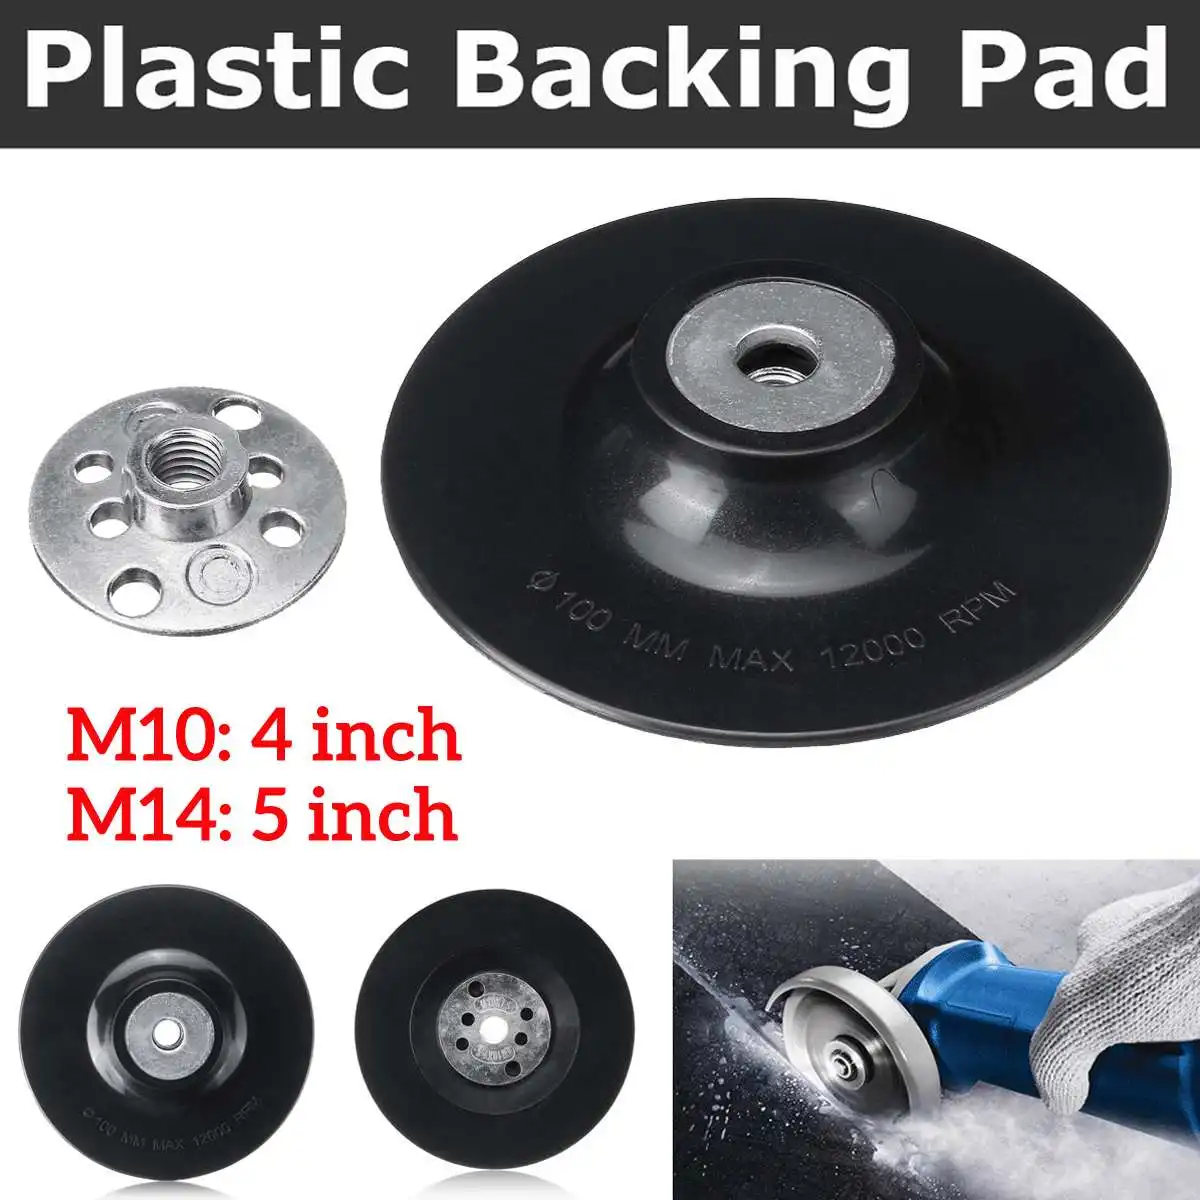 5″ Rubber Sanding Backing Pad Polishing Tool For Angle Grinder &M14 Drill Thread